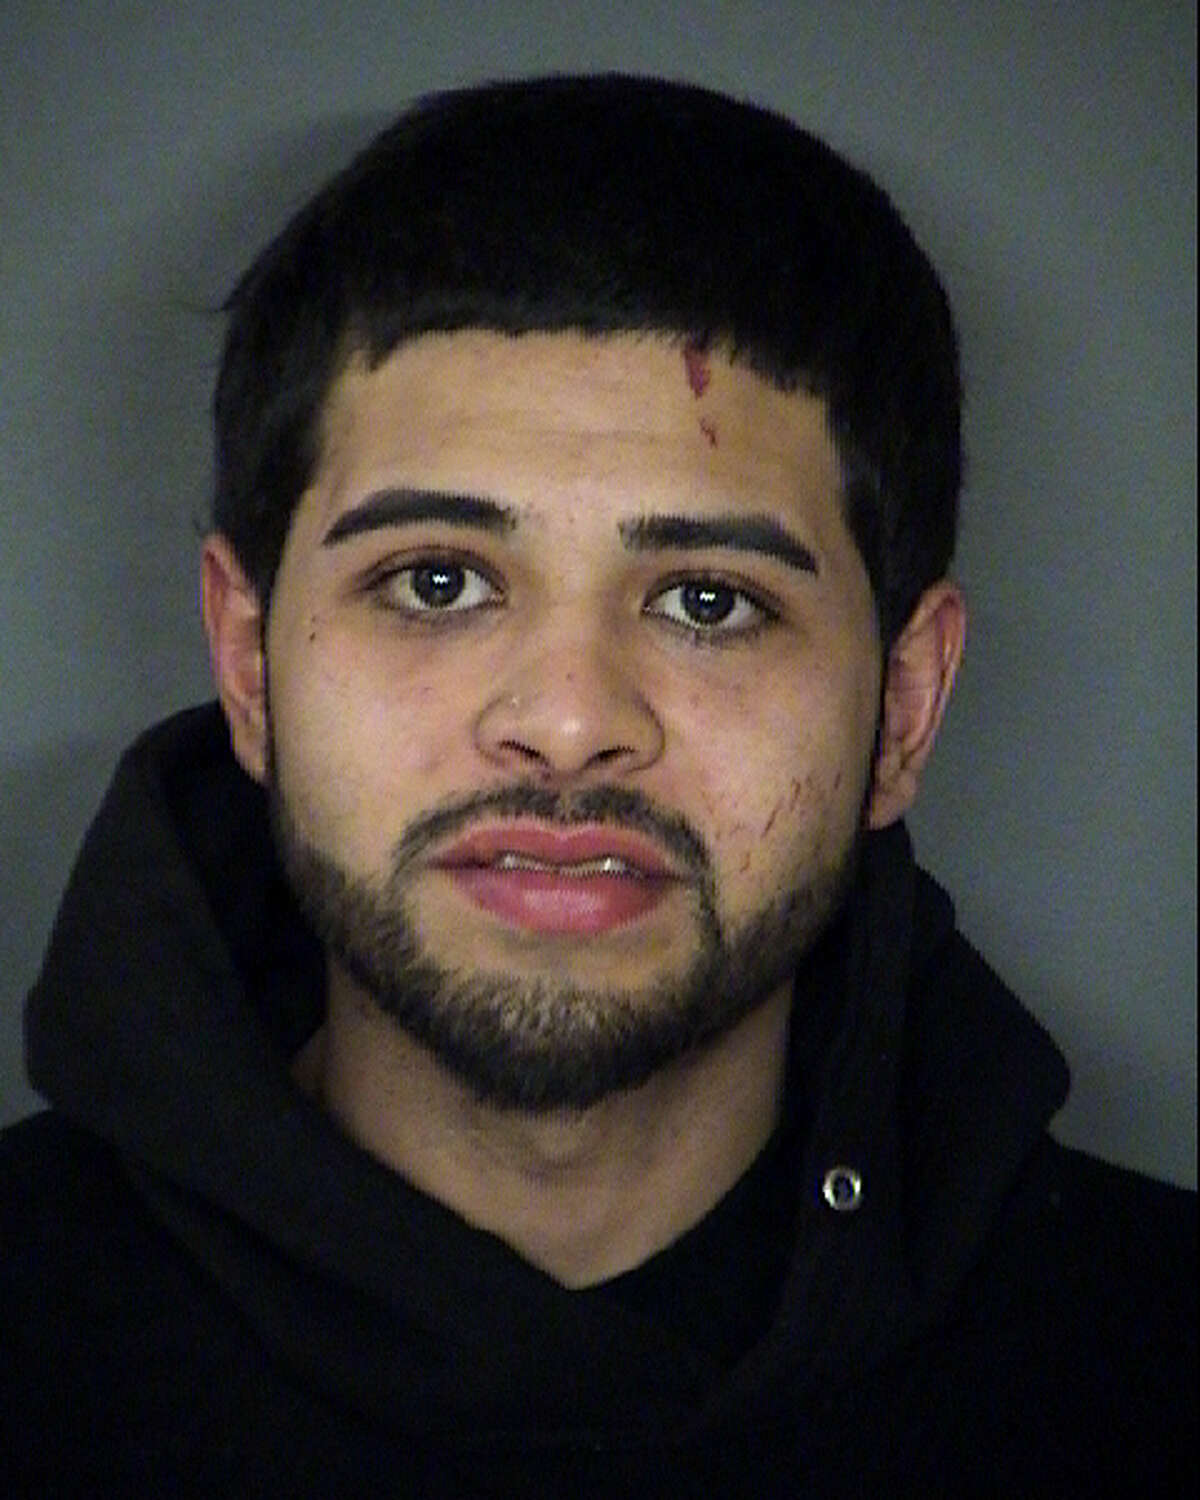 George Pesina-Rodriguez is suspected of jumping Mayor Ivy Taylor's fence and sleeping inside one of her cars.